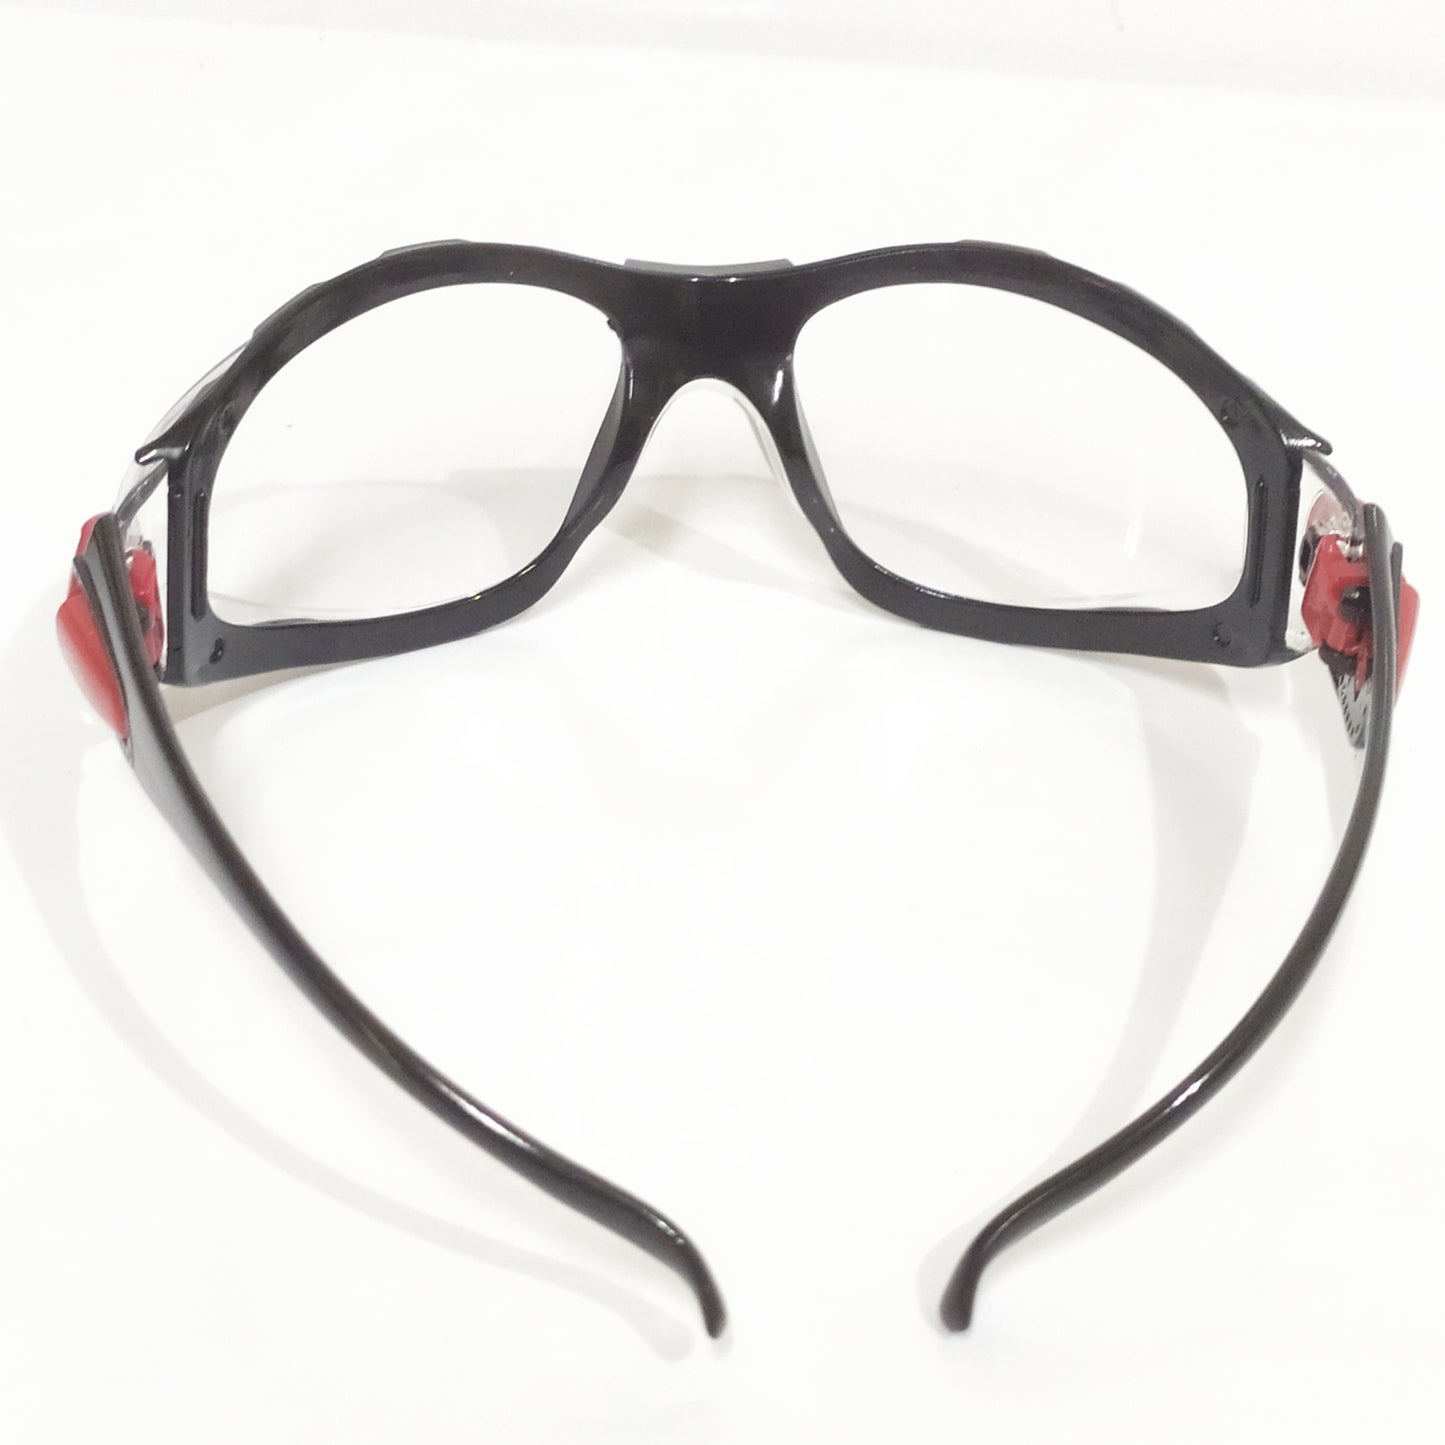 Clear Wraparound Riding Glasses for Bikers Motorcyclist Cyclist